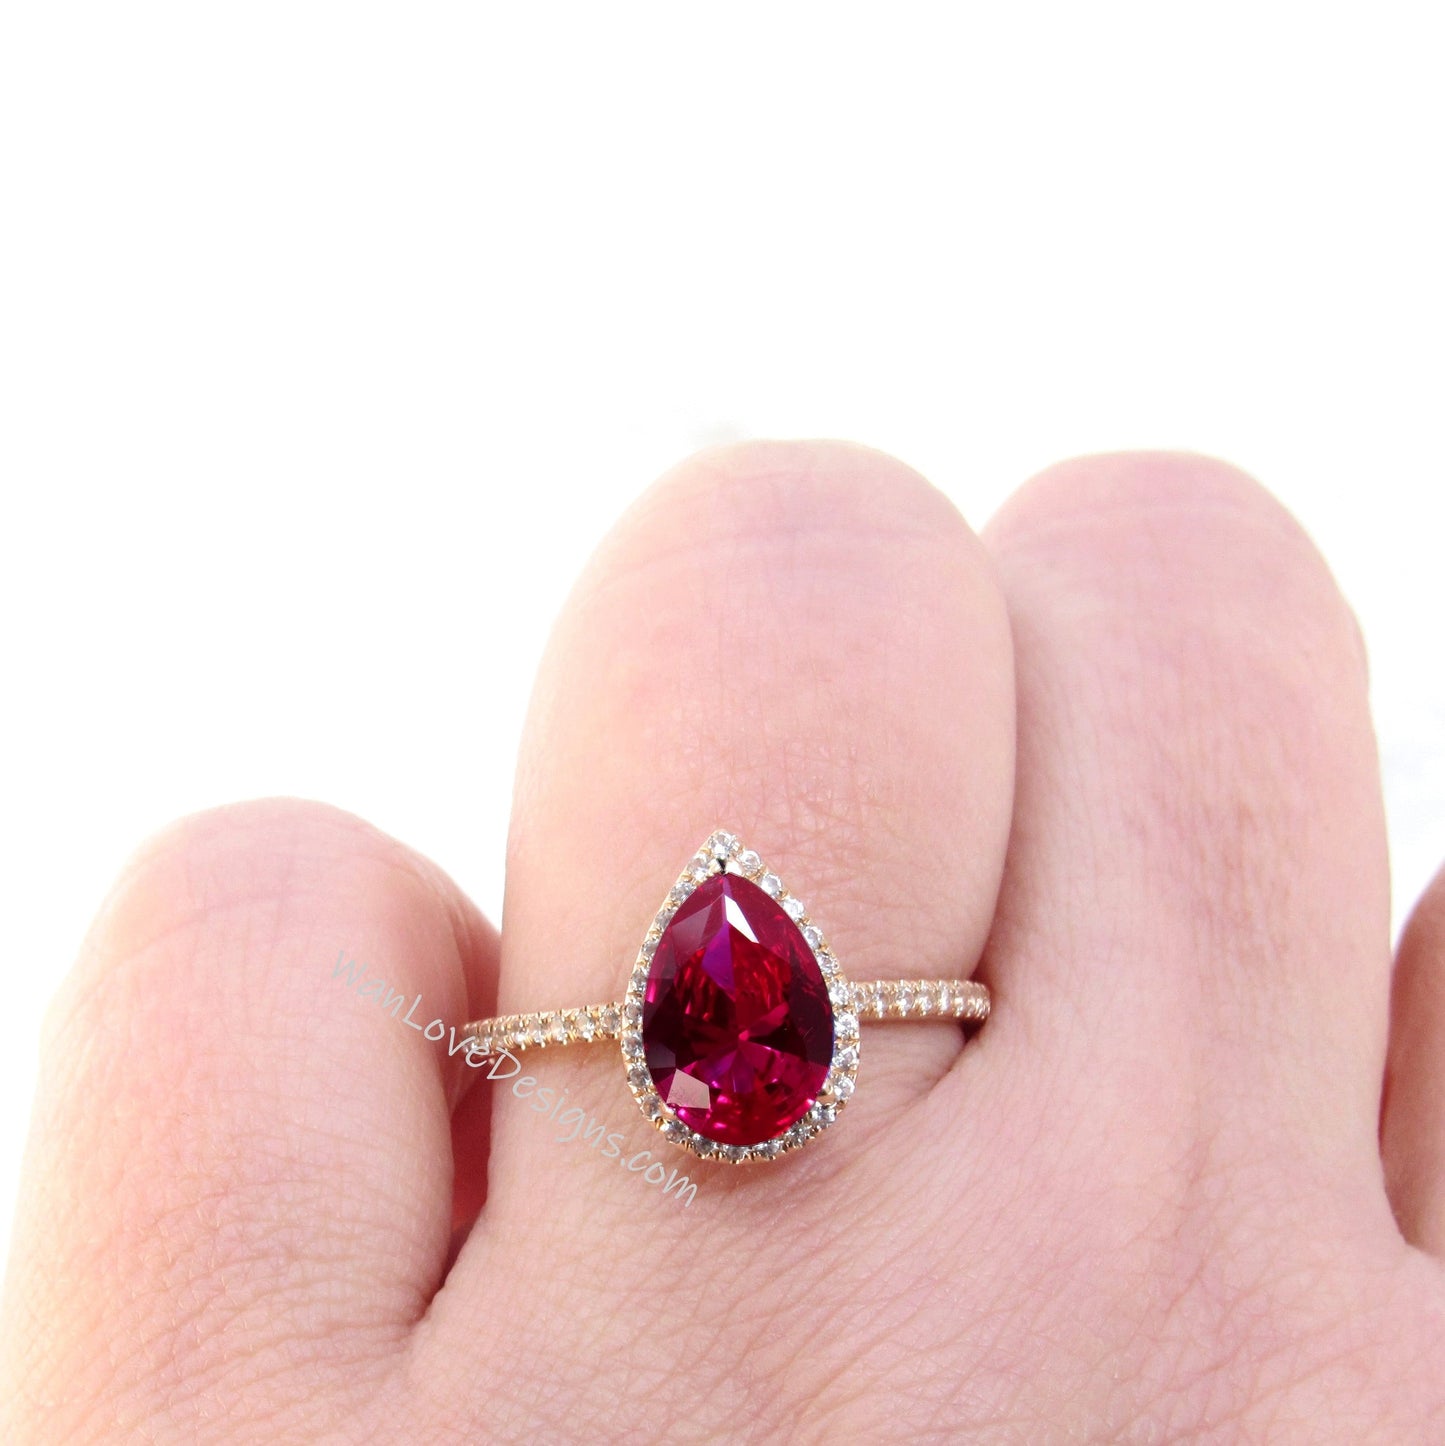 Vintage Pear shaped Ruby Engagement Ring, Pear Cut Unique 14k Rose Gold Diamond Halo Ring, Wedding Ring Anniversary Ring Proposal Ring.